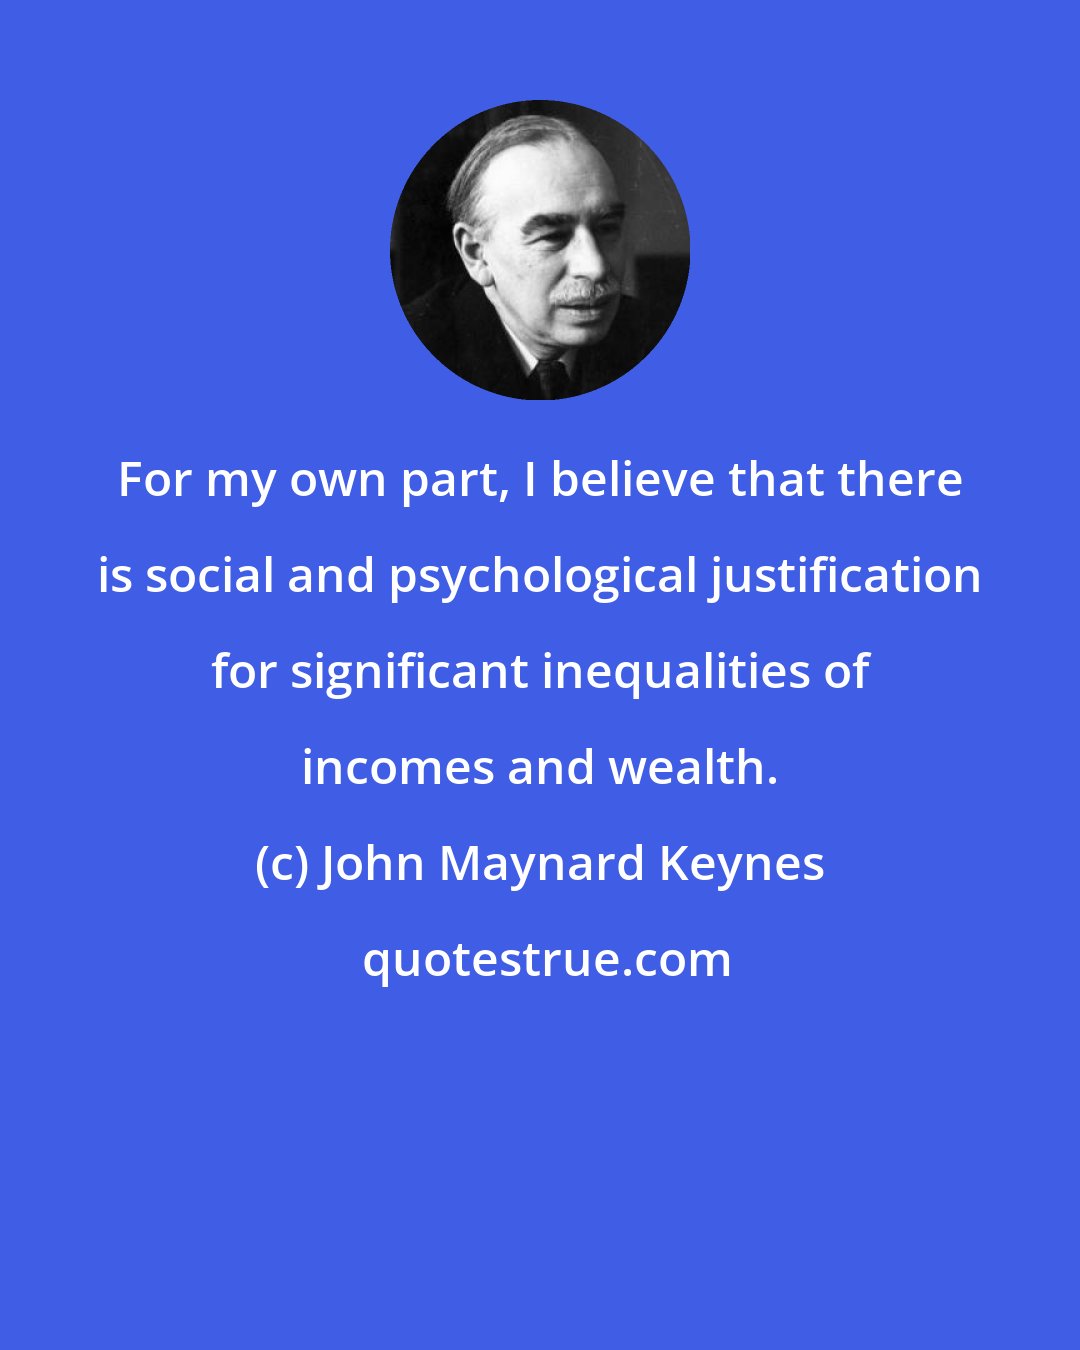 John Maynard Keynes: For my own part, I believe that there is social and psychological justification for significant inequalities of incomes and wealth.